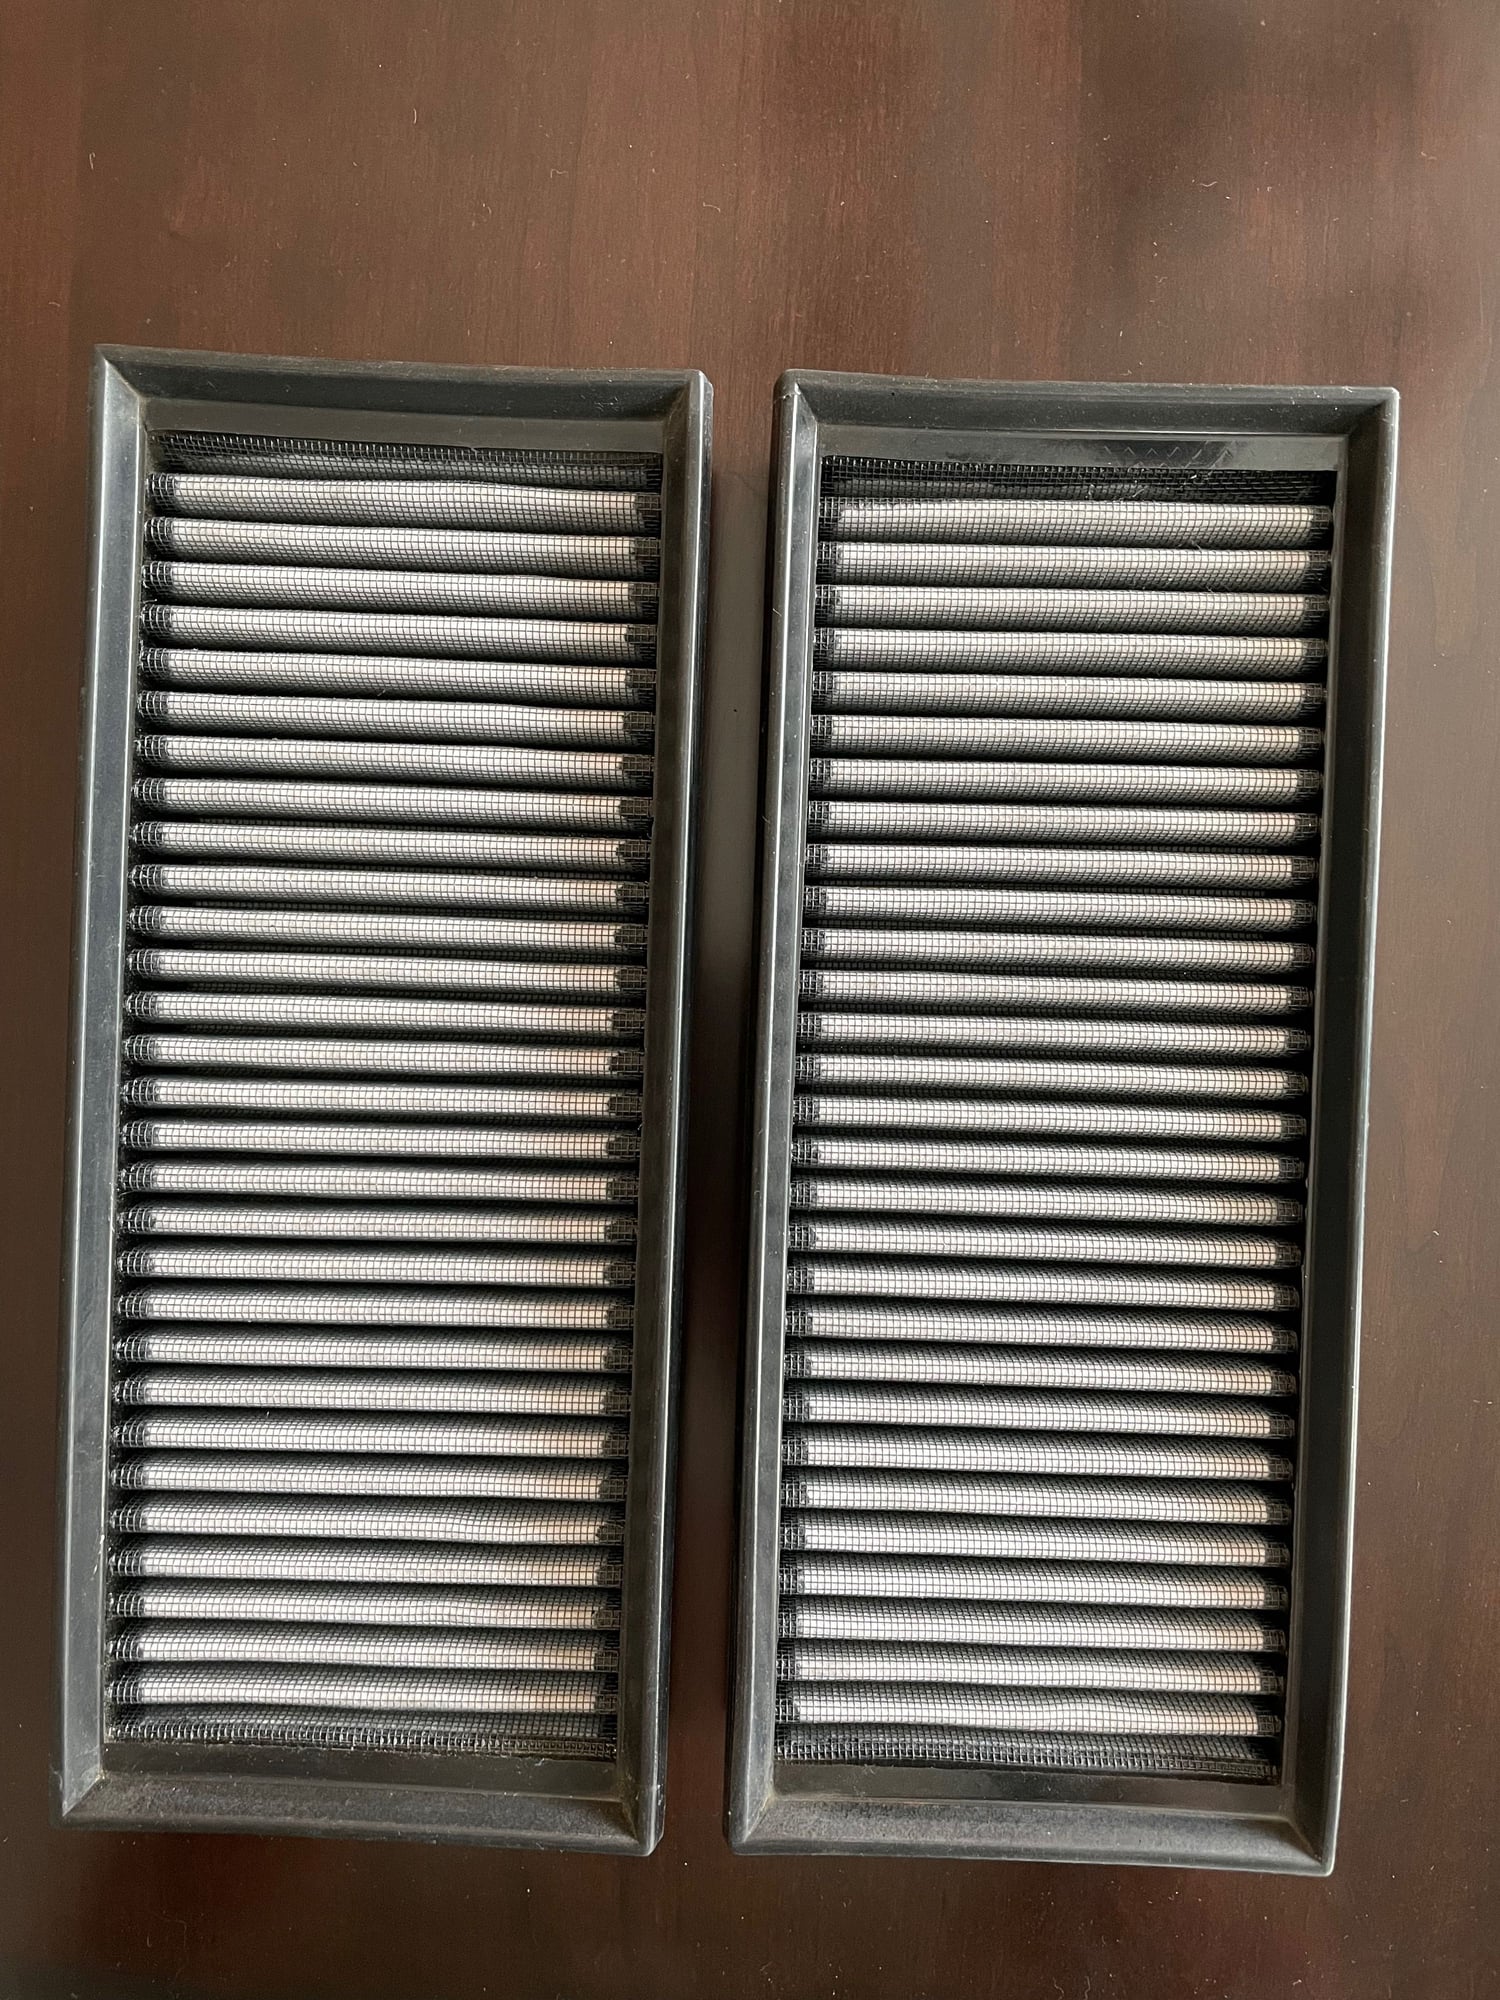 Engine - Intake/Fuel - aFe Magnum Flow PRO DRY S Air Filter pair - New - 2011 to 2016 Mercedes-Benz E63 AMG - 2011 to 2016 Mercedes-Benz E63 AMG S - 2011 to 2016 Mercedes-Benz S63 AMG - 2011 to 2016 Mercedes-Benz CL63 AMG - Folsom, CA 95630, United States